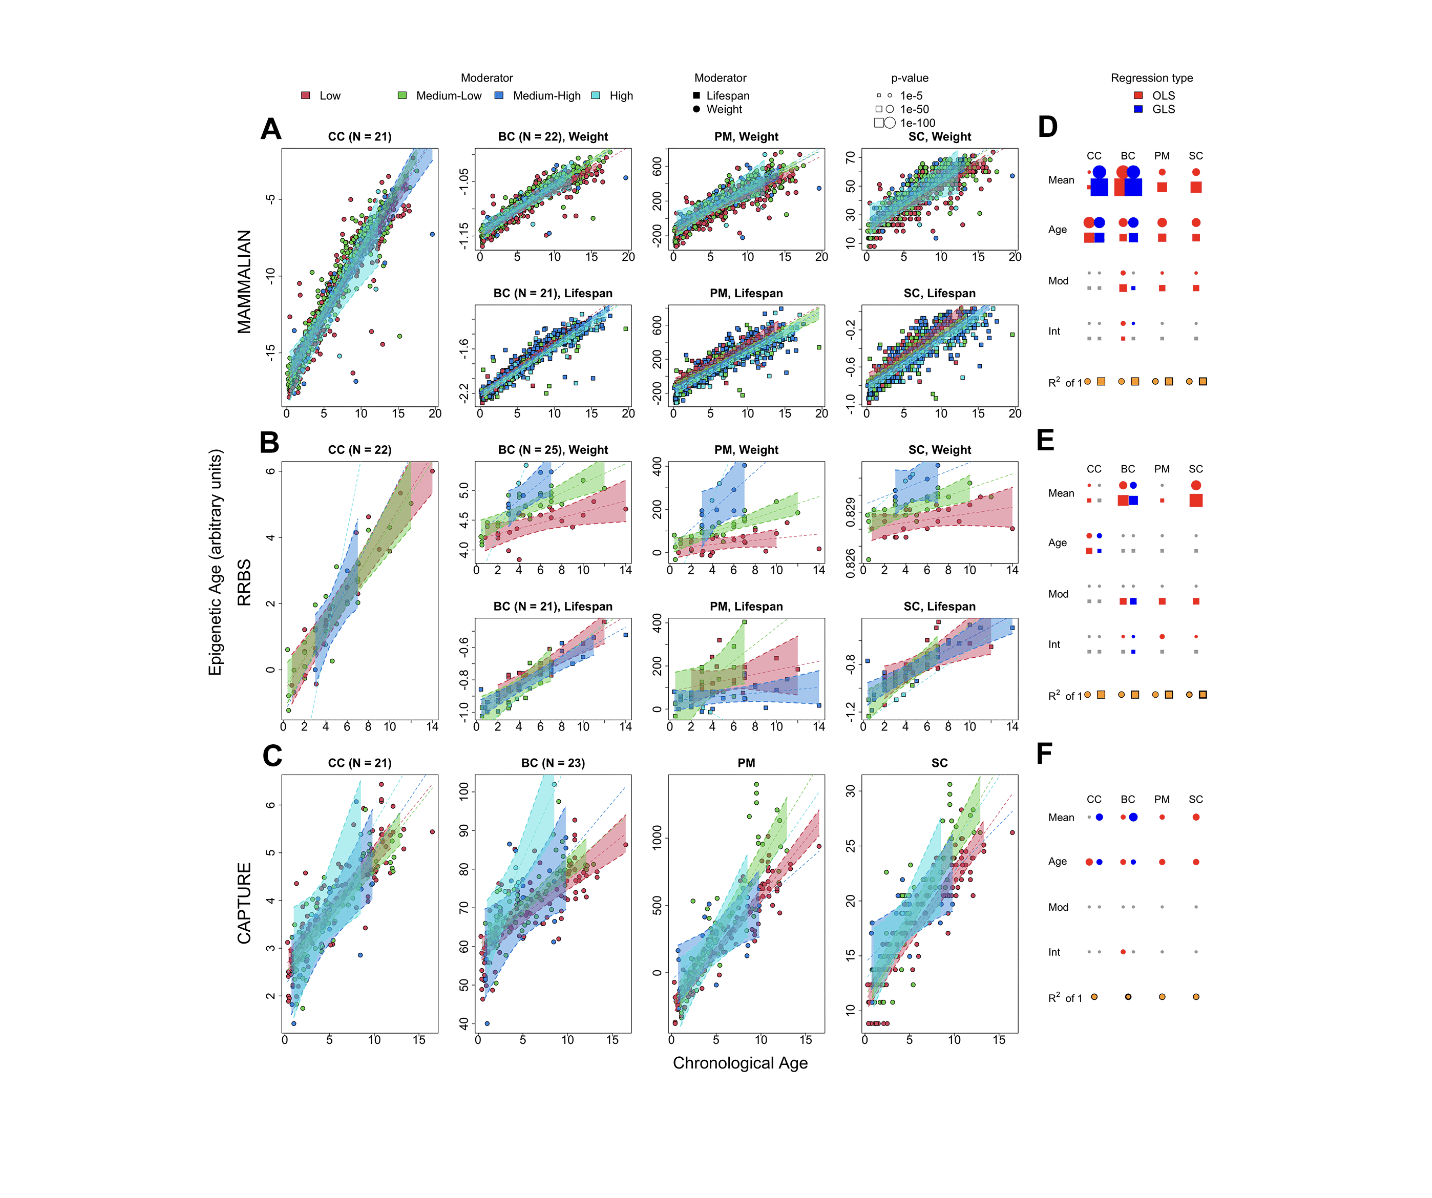 Co-analysis of methylation platforms for signatures of biological aging in the domestic dog reveals previously unexplored confounding factors